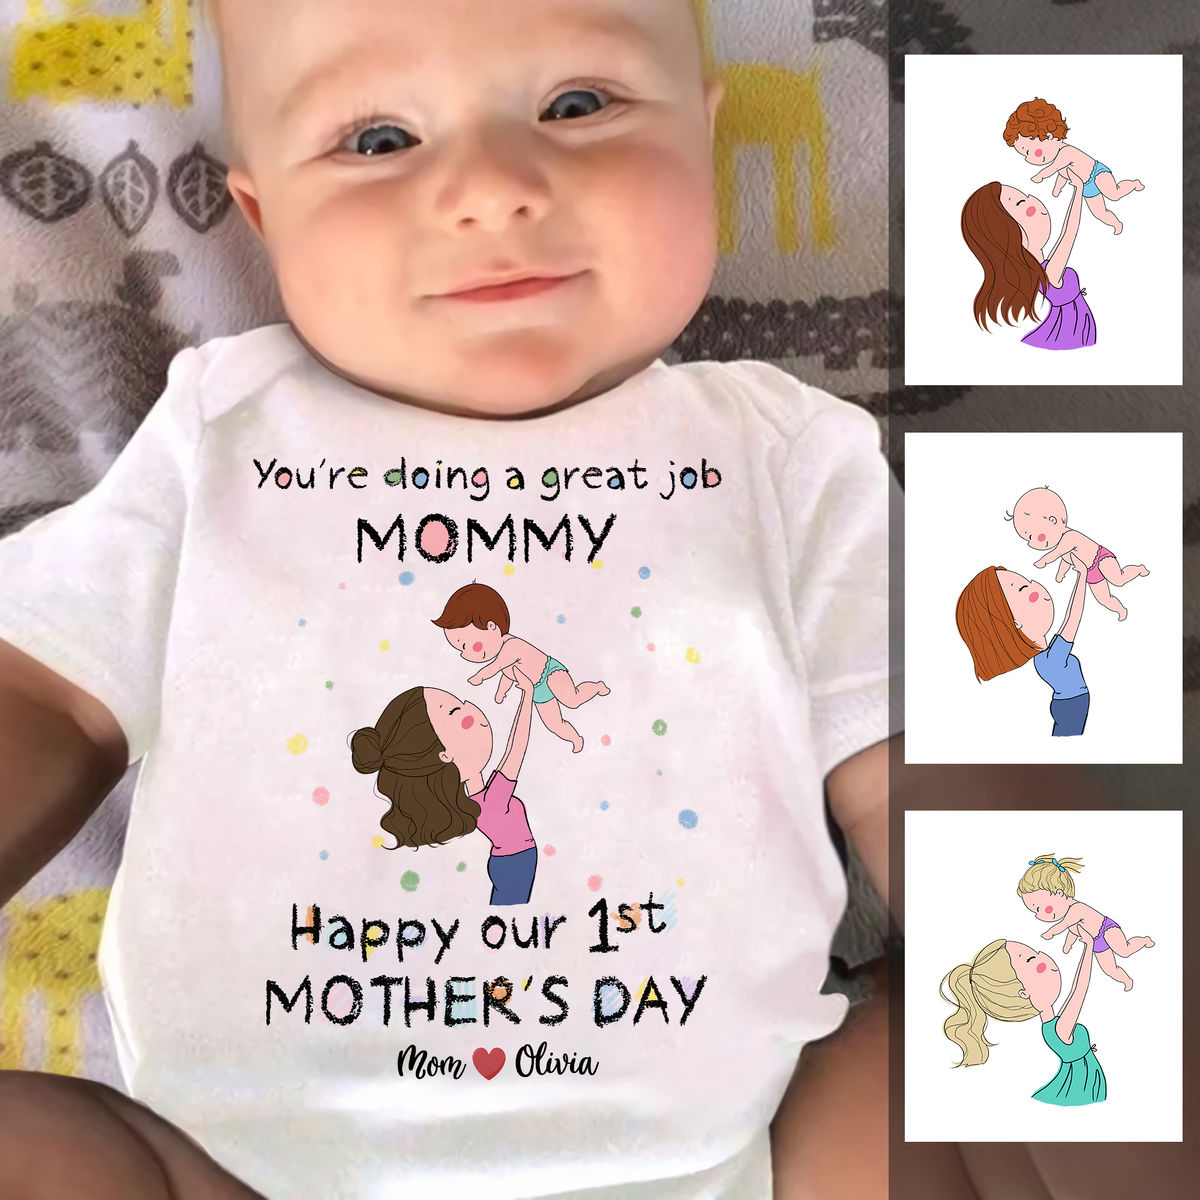 Personalized Shirt - Custom Baby Onesies - You're doing a great job mommy Happy 1st Mother's Day